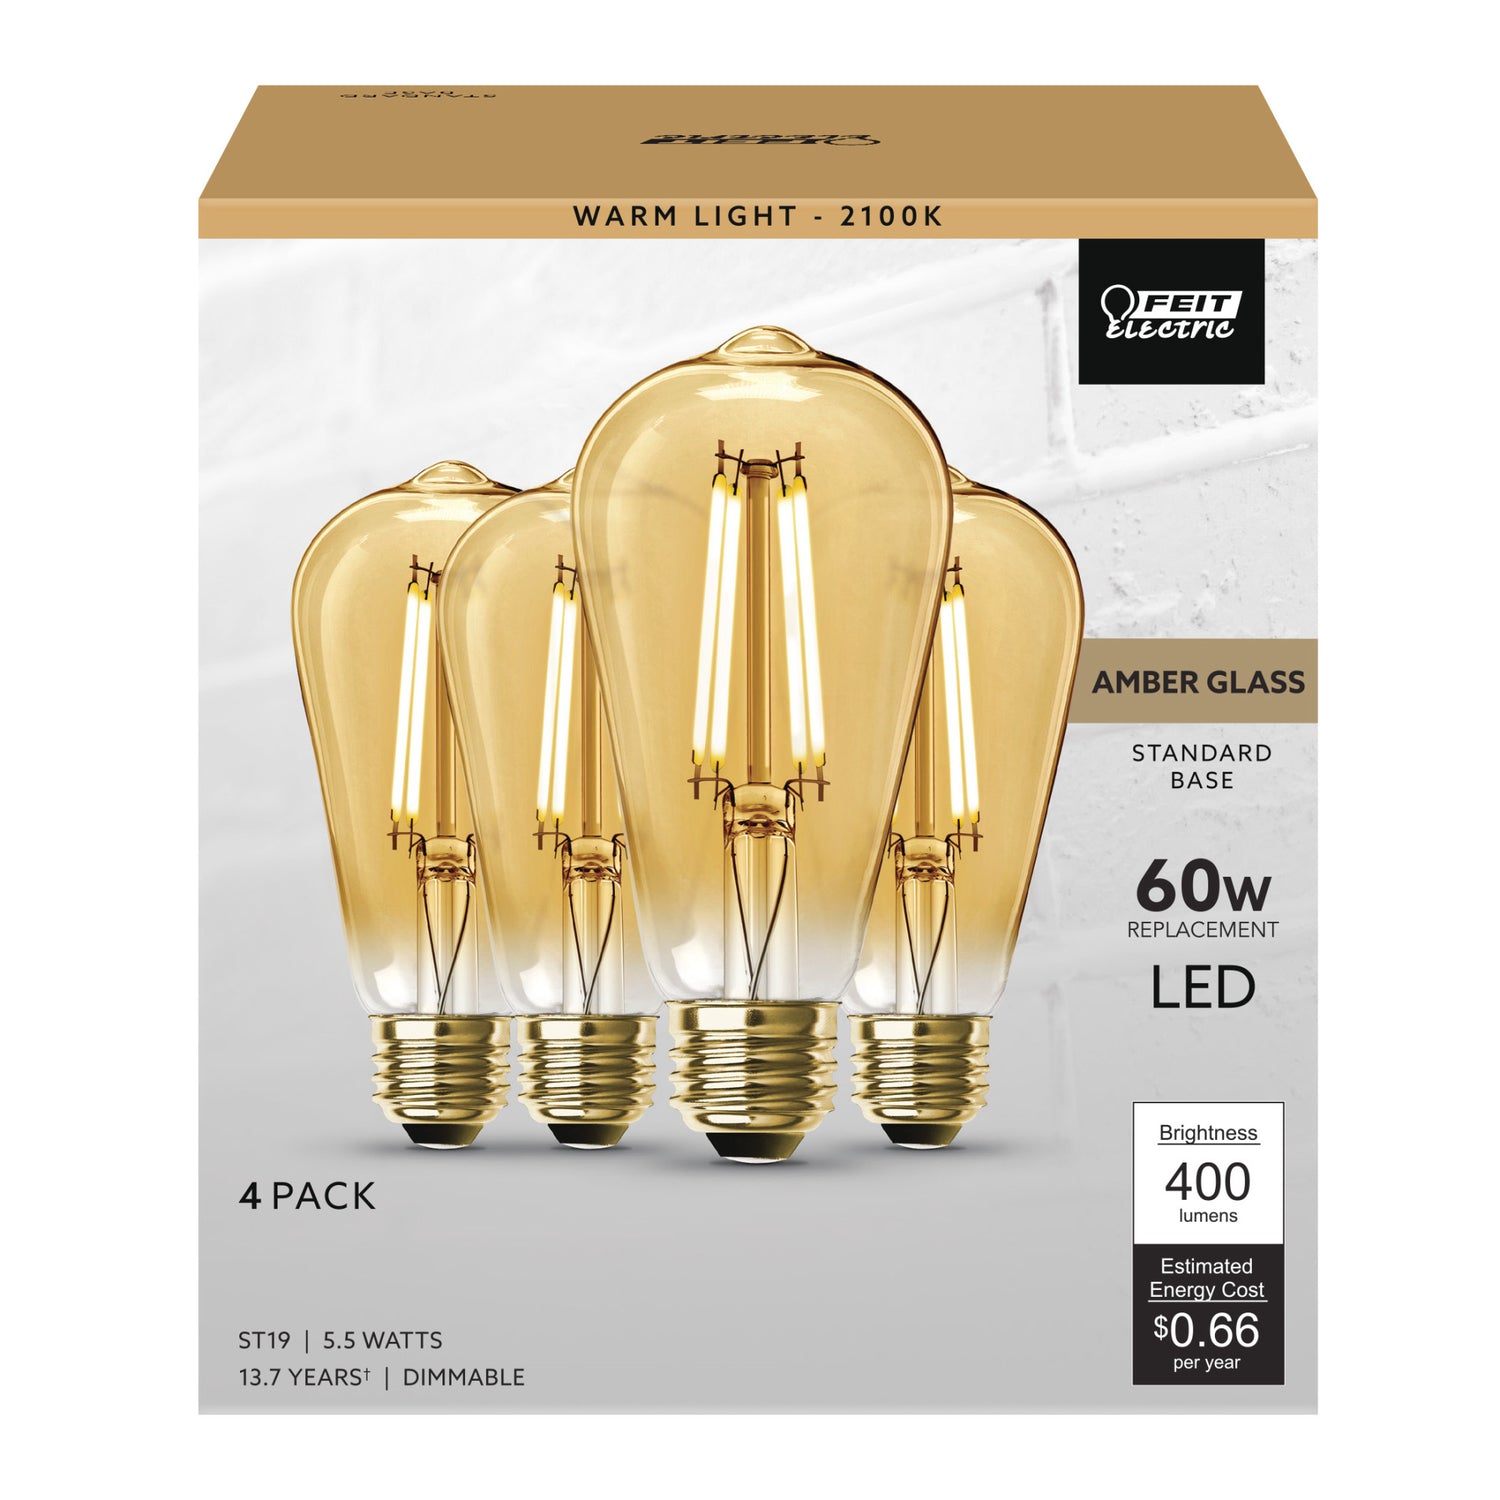 5.5W (60W Replacement) ST19 E26 Dimmable Straight Filament Amber Glass Vintage Edison LED Light Bulb, Warm Light (96-Pack)